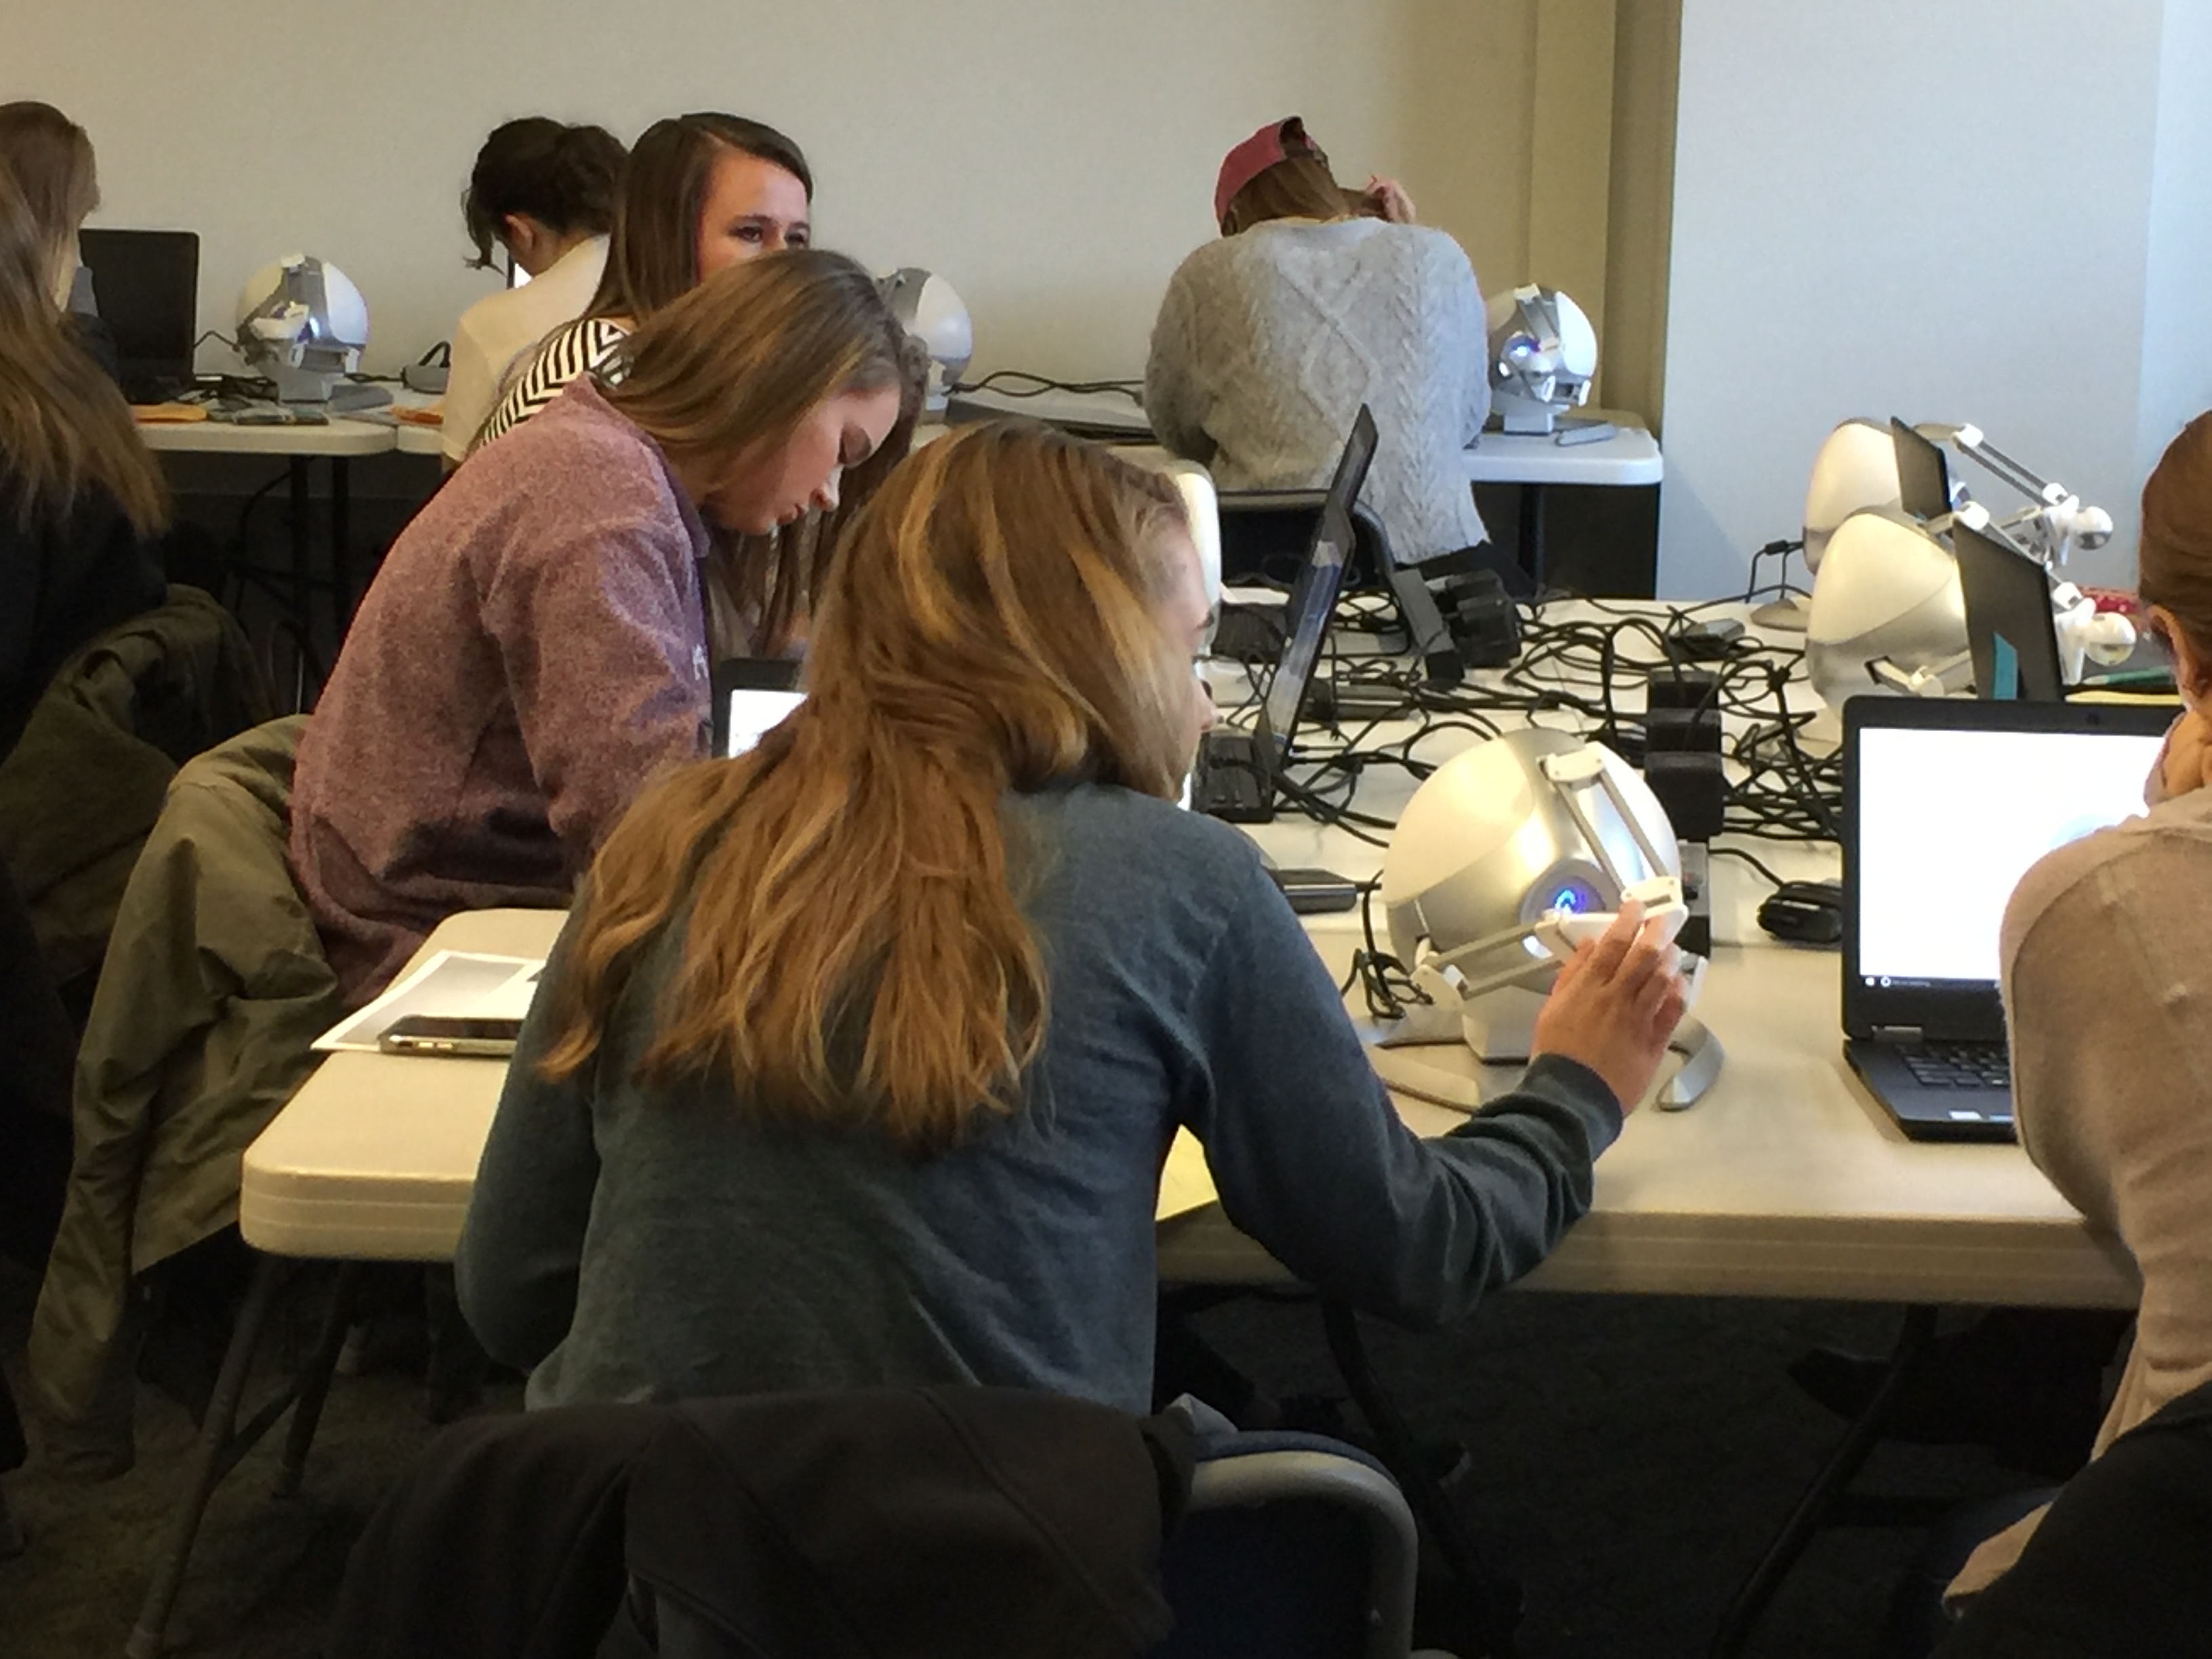 Students working with Visuohaptic simulations